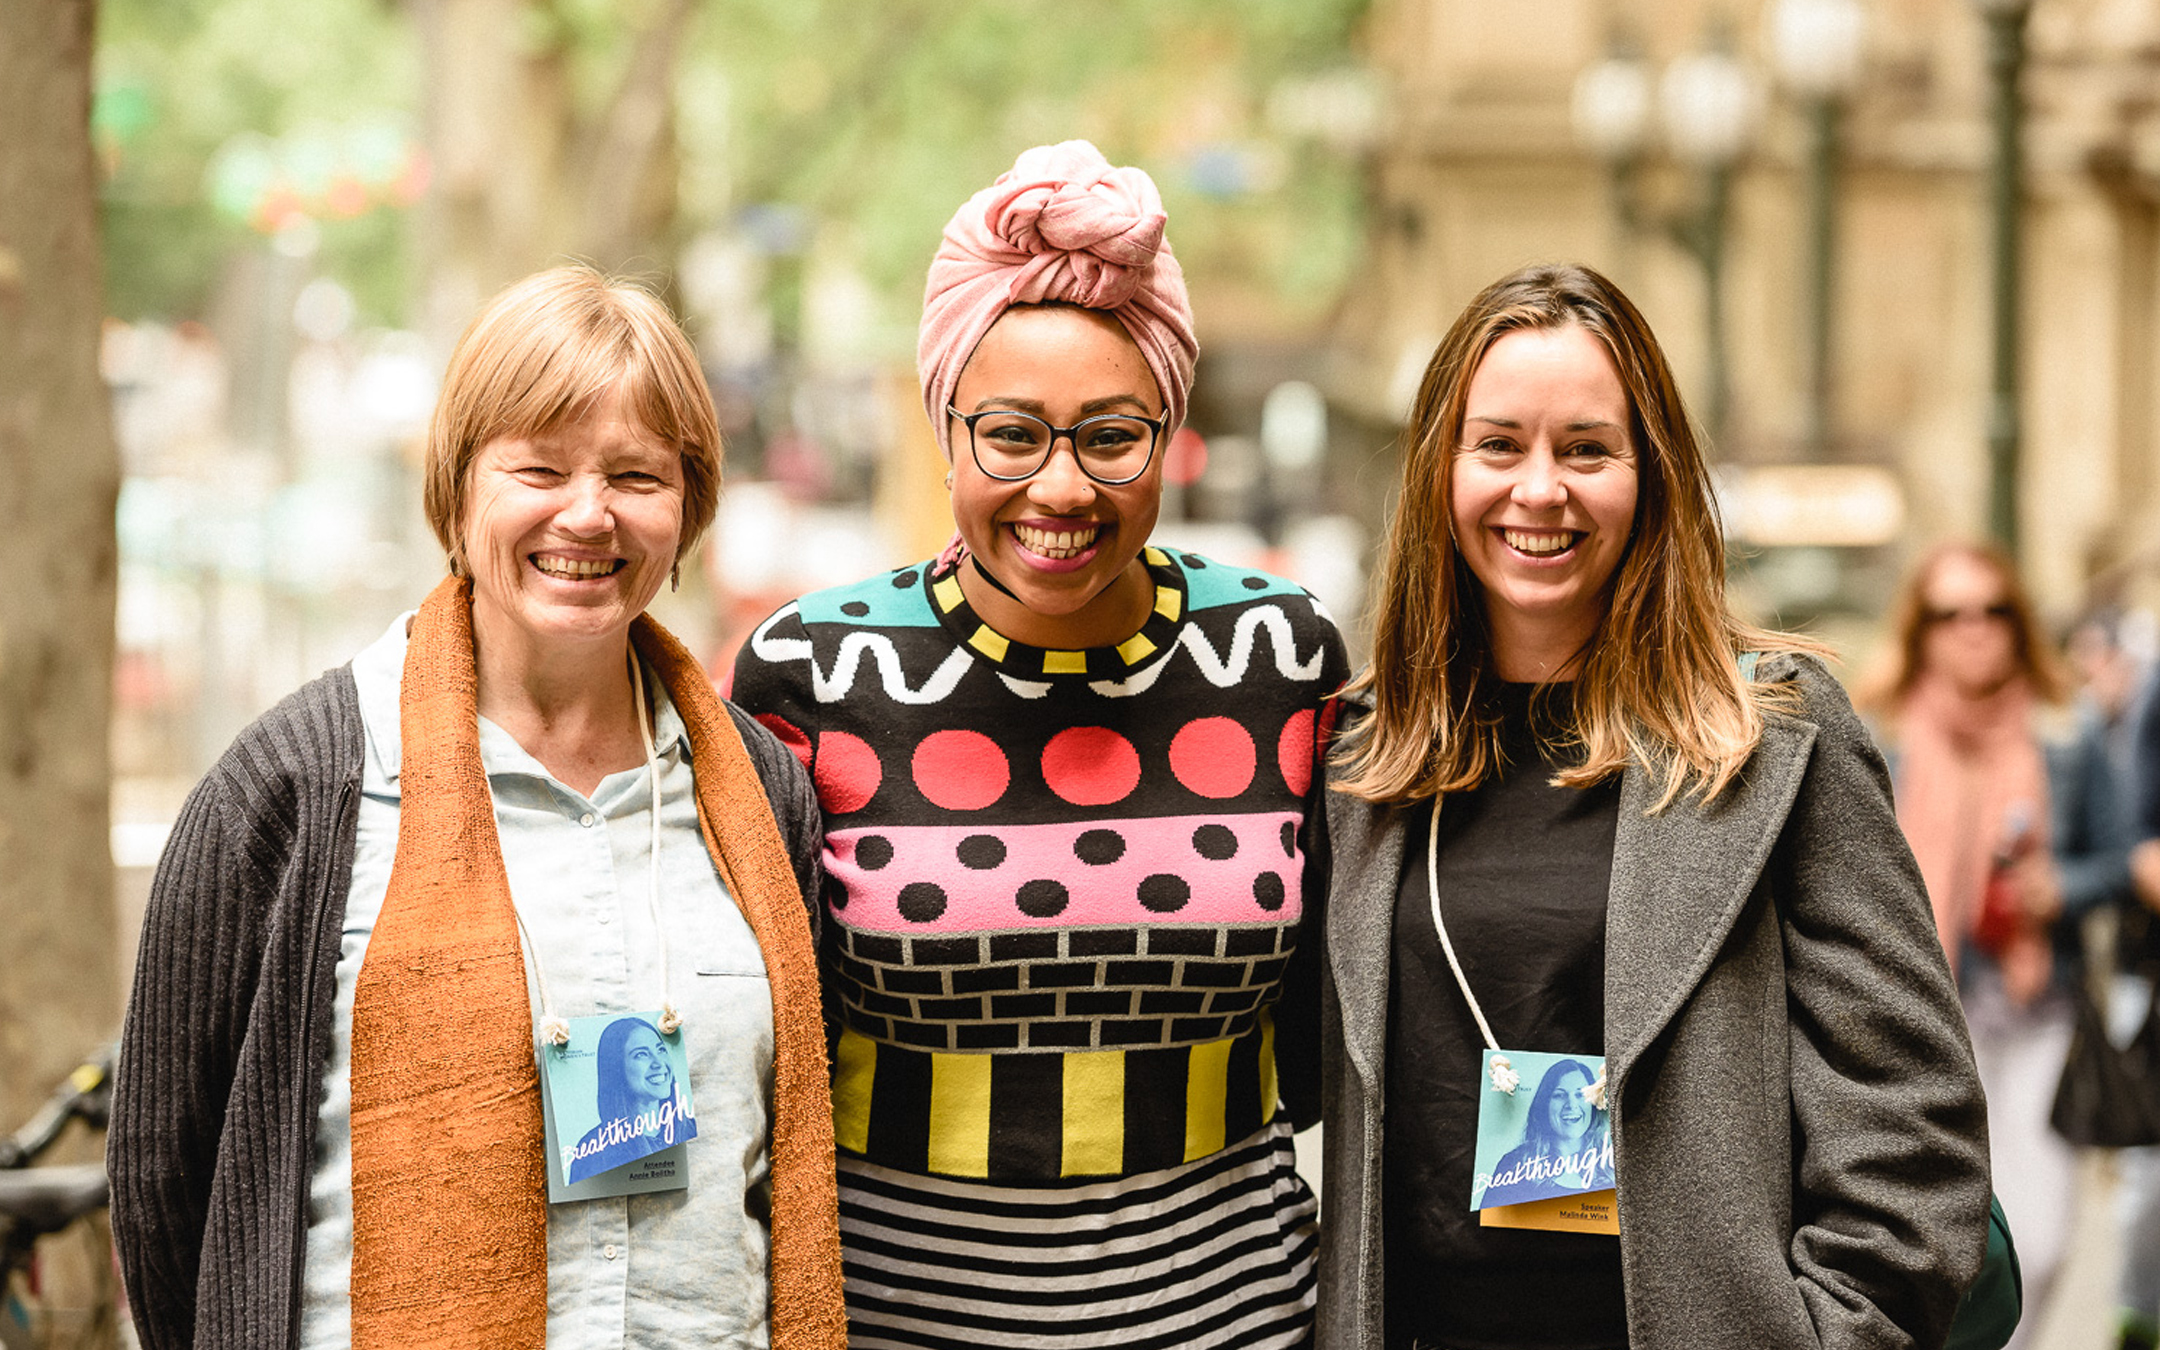 Yassmin Abdel-Magied with fans